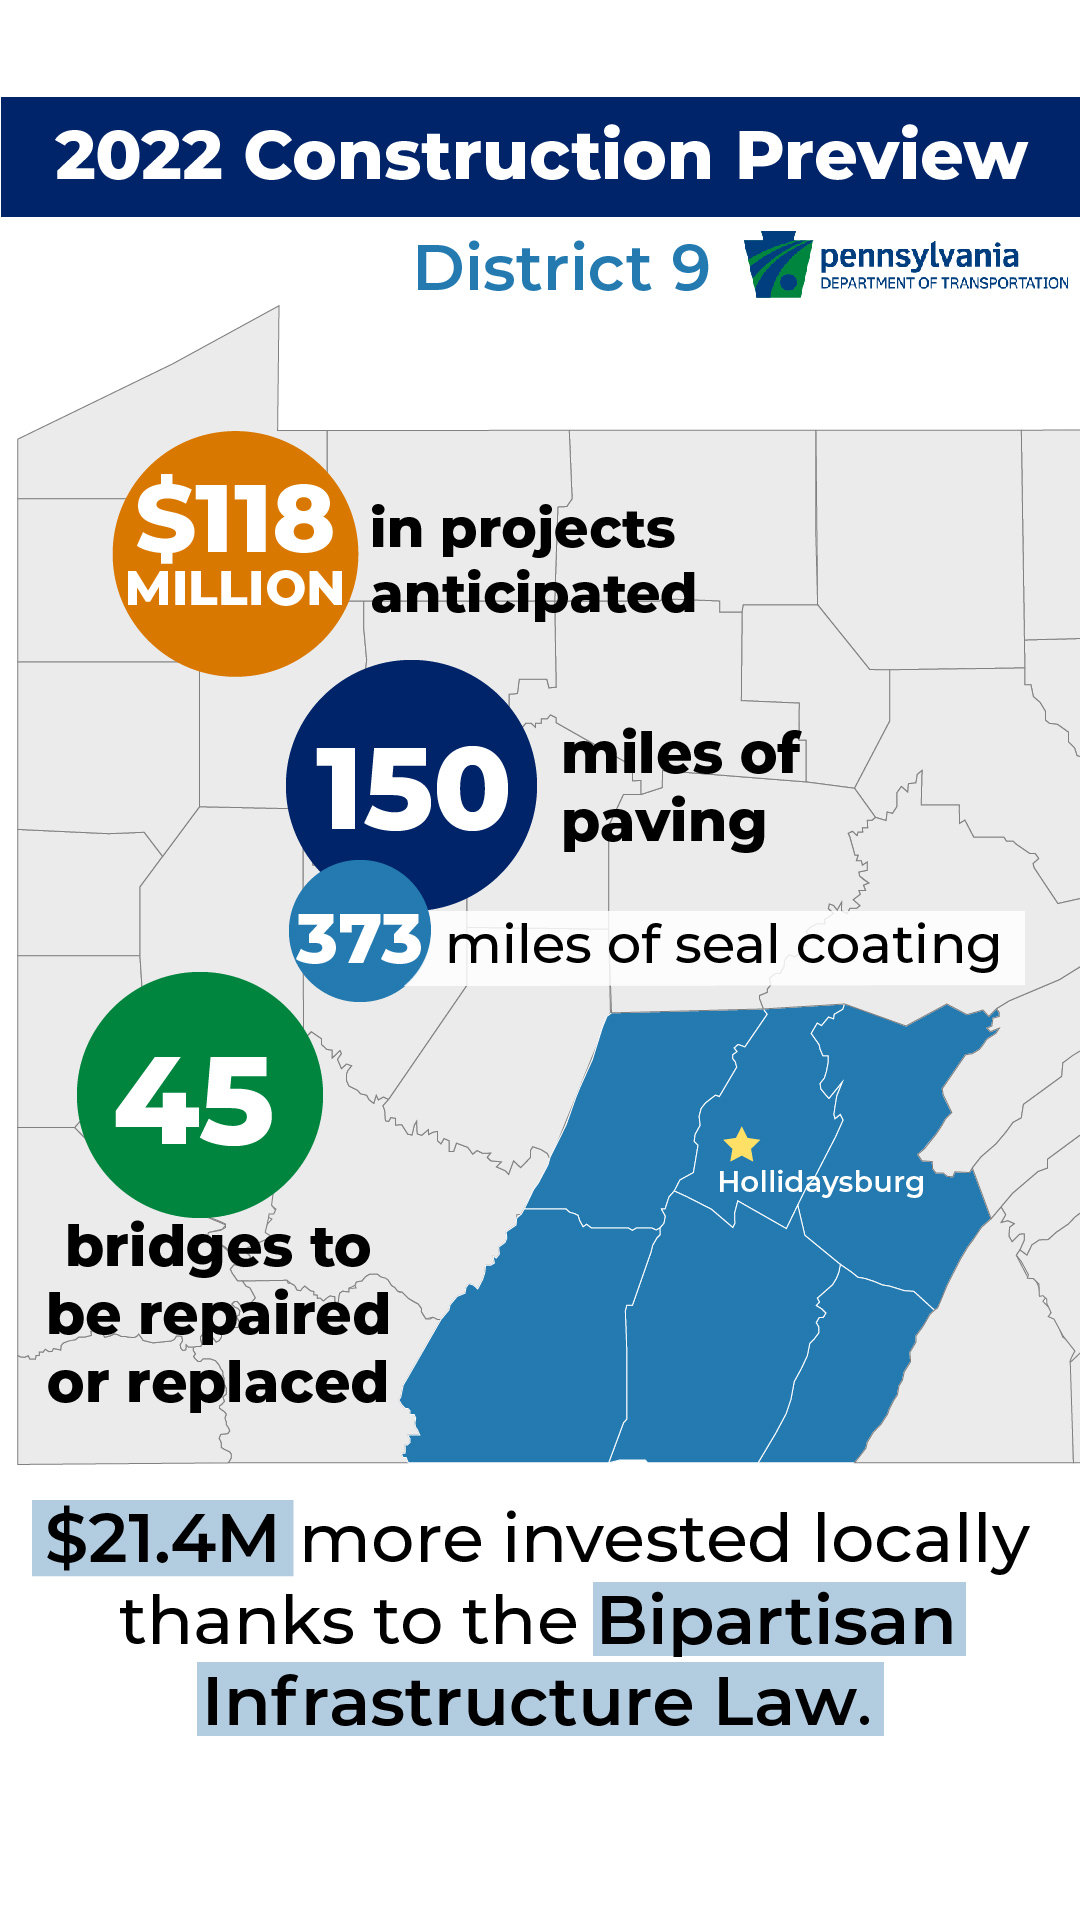 In PennDOT's District 9, $118 million in projects are anticipated for 2022. Also expect 150 miles of paving, 373 miles of seal coating and 80 bridge repairs. Thanks to the Bipartisan Infrastructure Law, $21.4 million more will be invested locally.